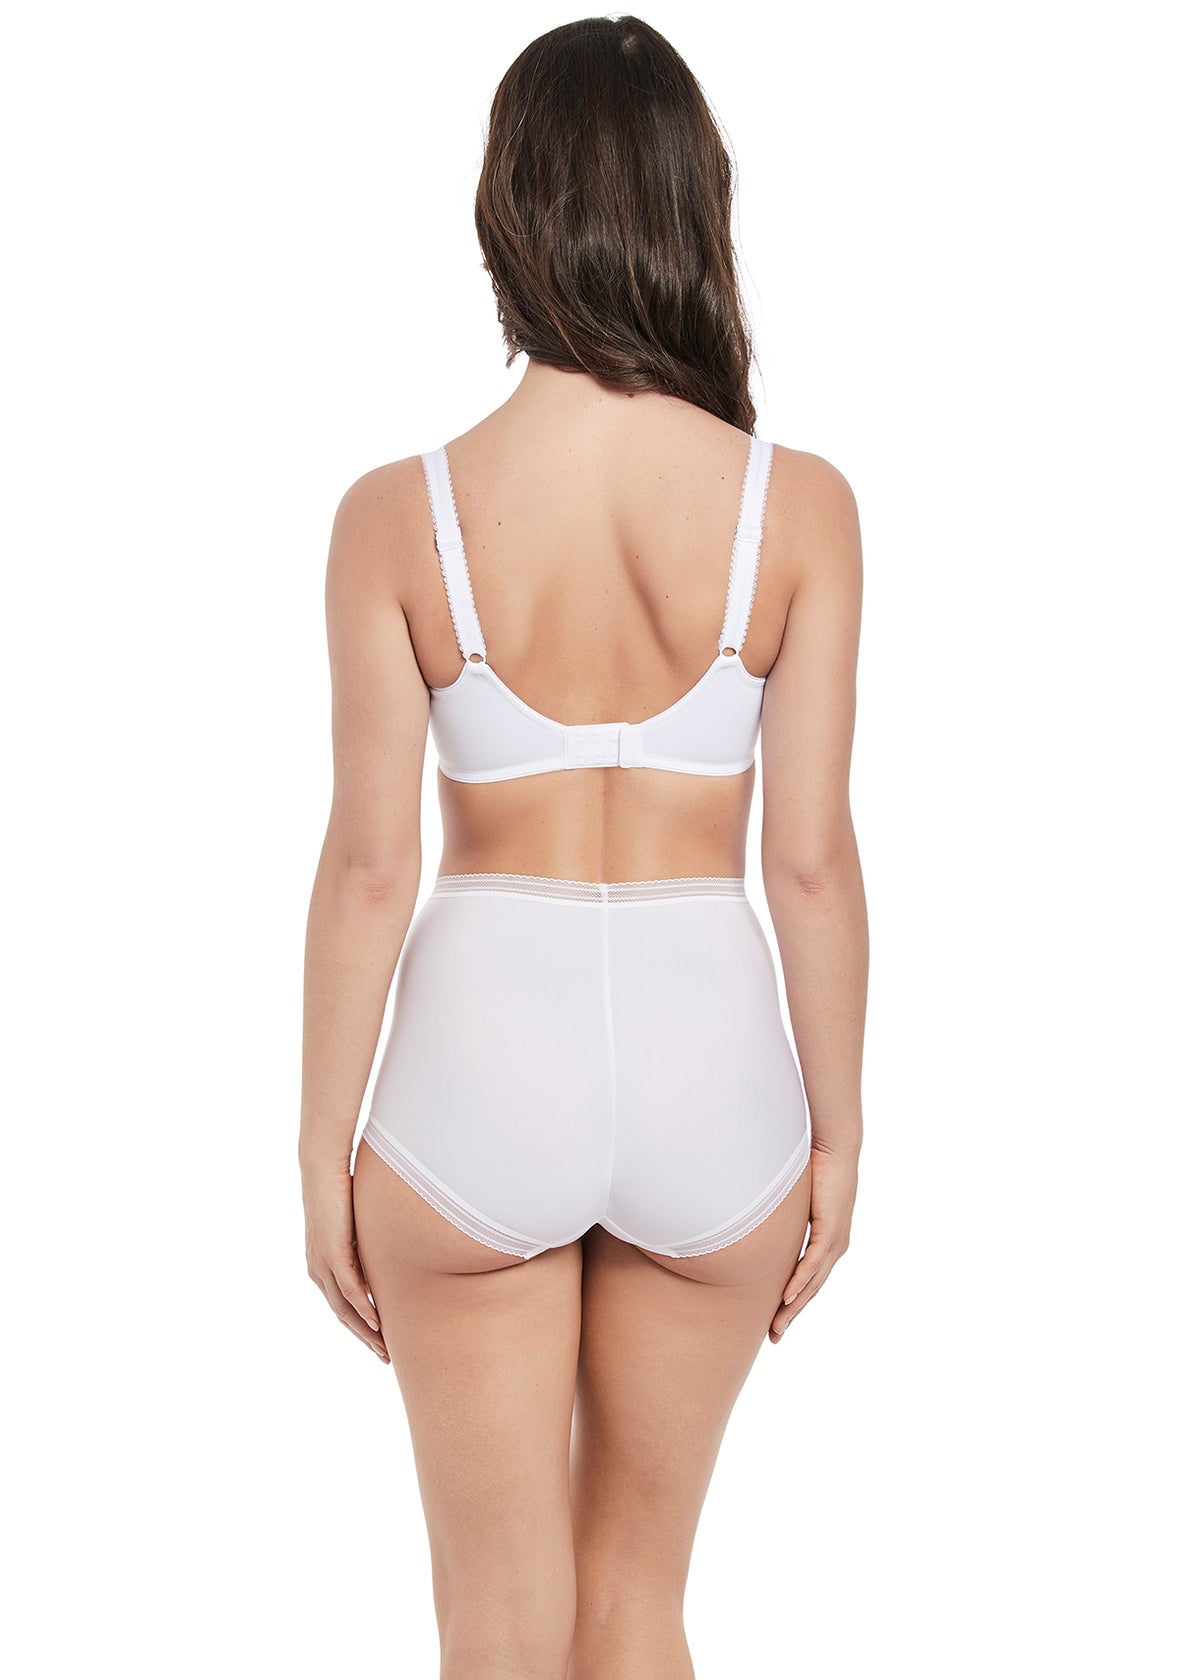 Fantasie Fusion Full Cup Side Support Bra - White 3 Shaws Department Stores